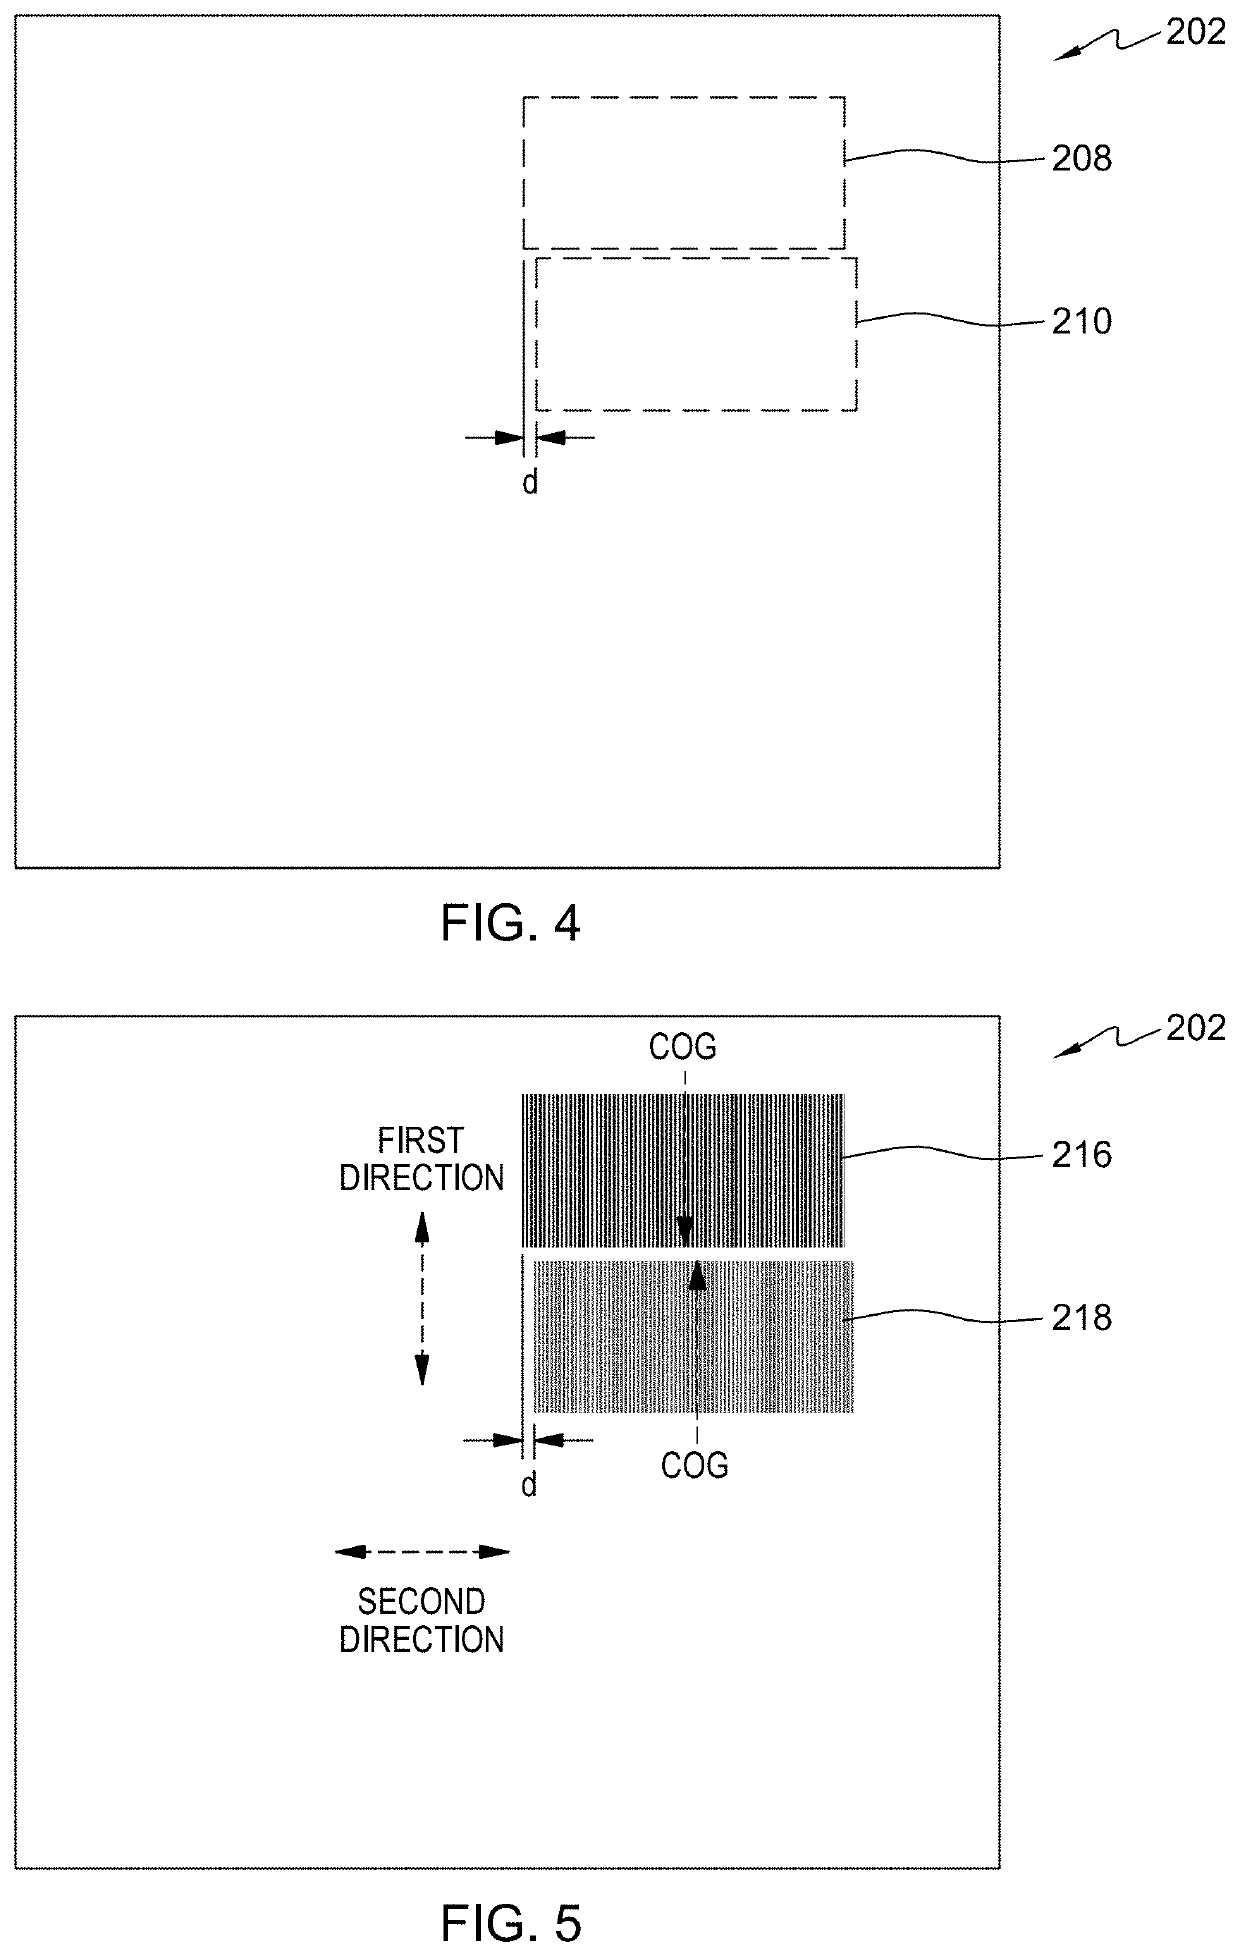 Self-referencing and self-calibrating interference pattern overlay measurement